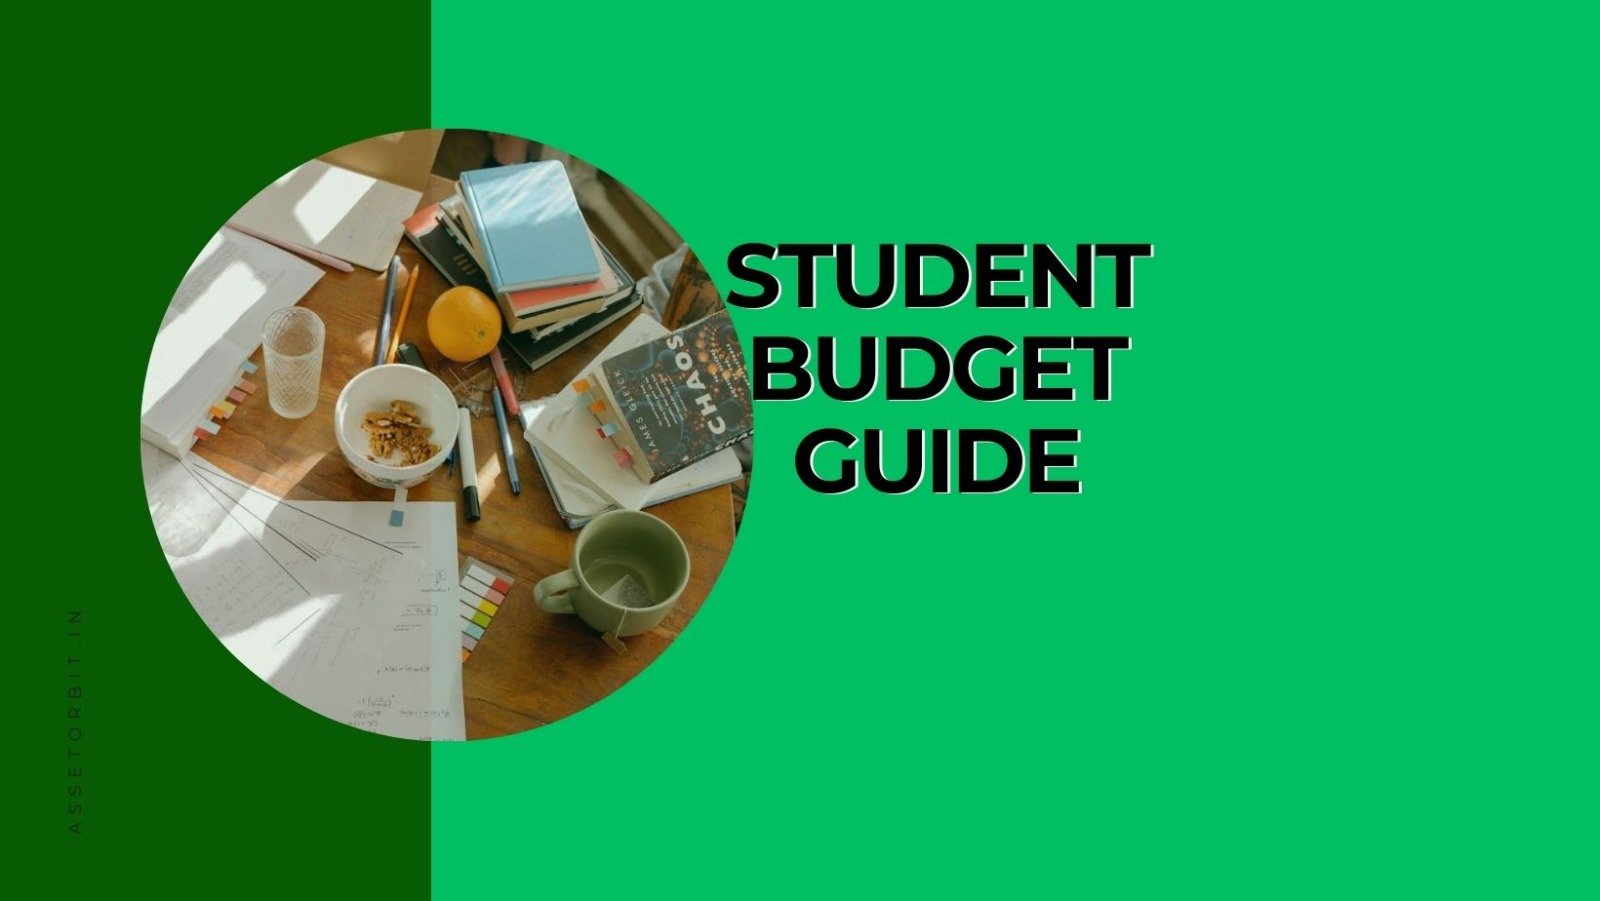 Student Budget Guide: How to Create a Simple Budget?